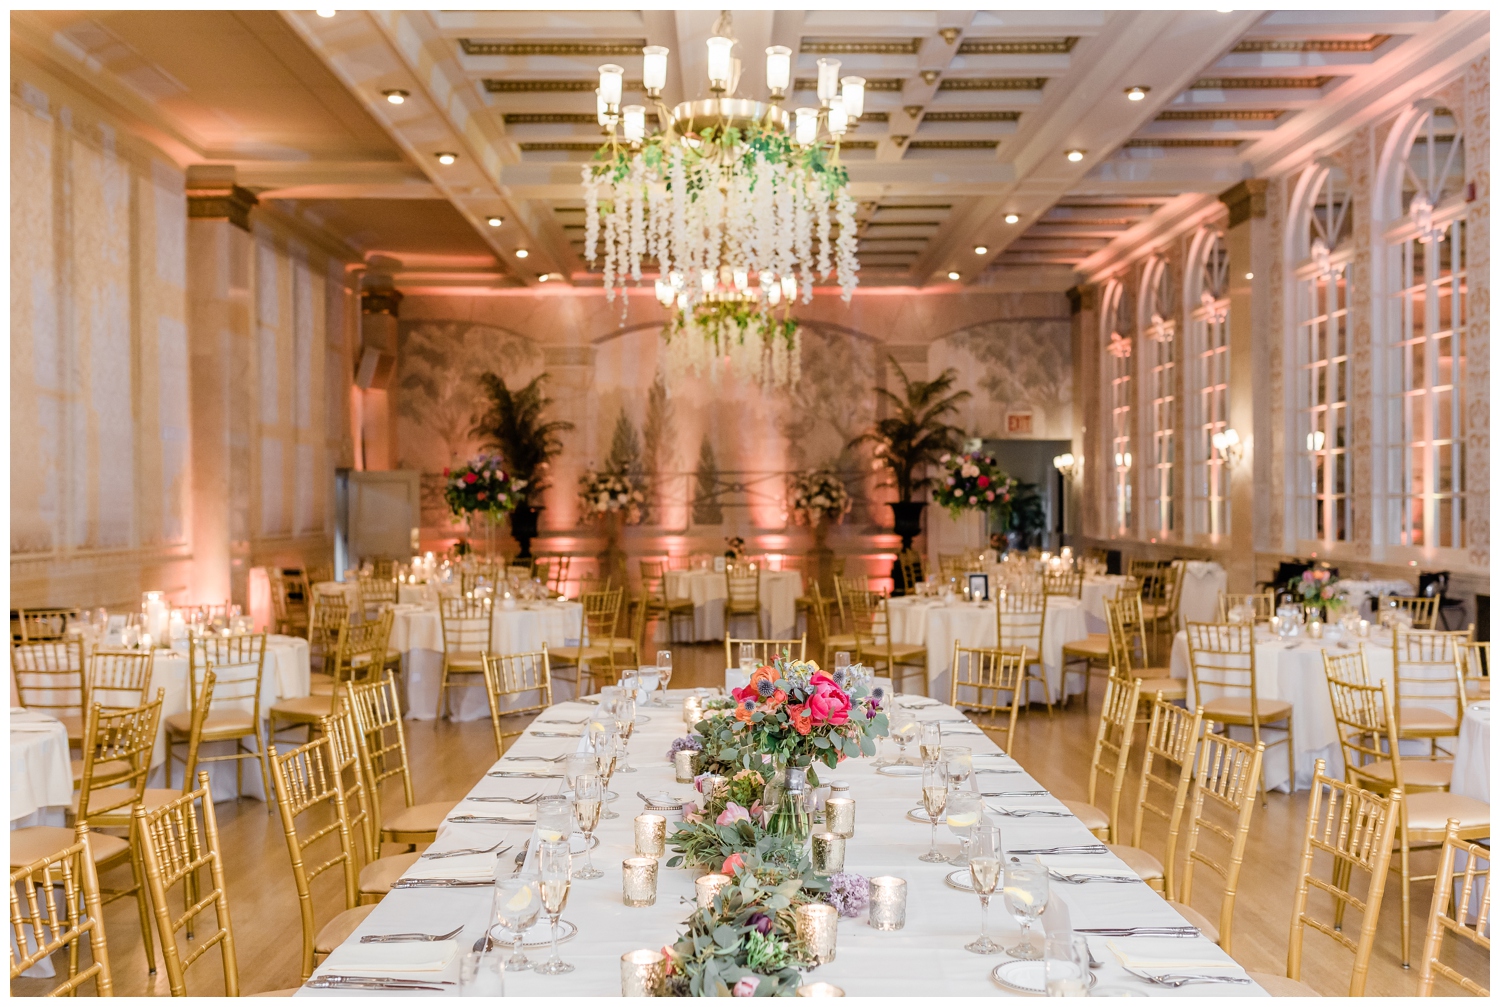 The wedding reception space at Franklin Plaza ballroom in Troy, NY. Decorated with bright colorful floral arrangements and greenery at every table.